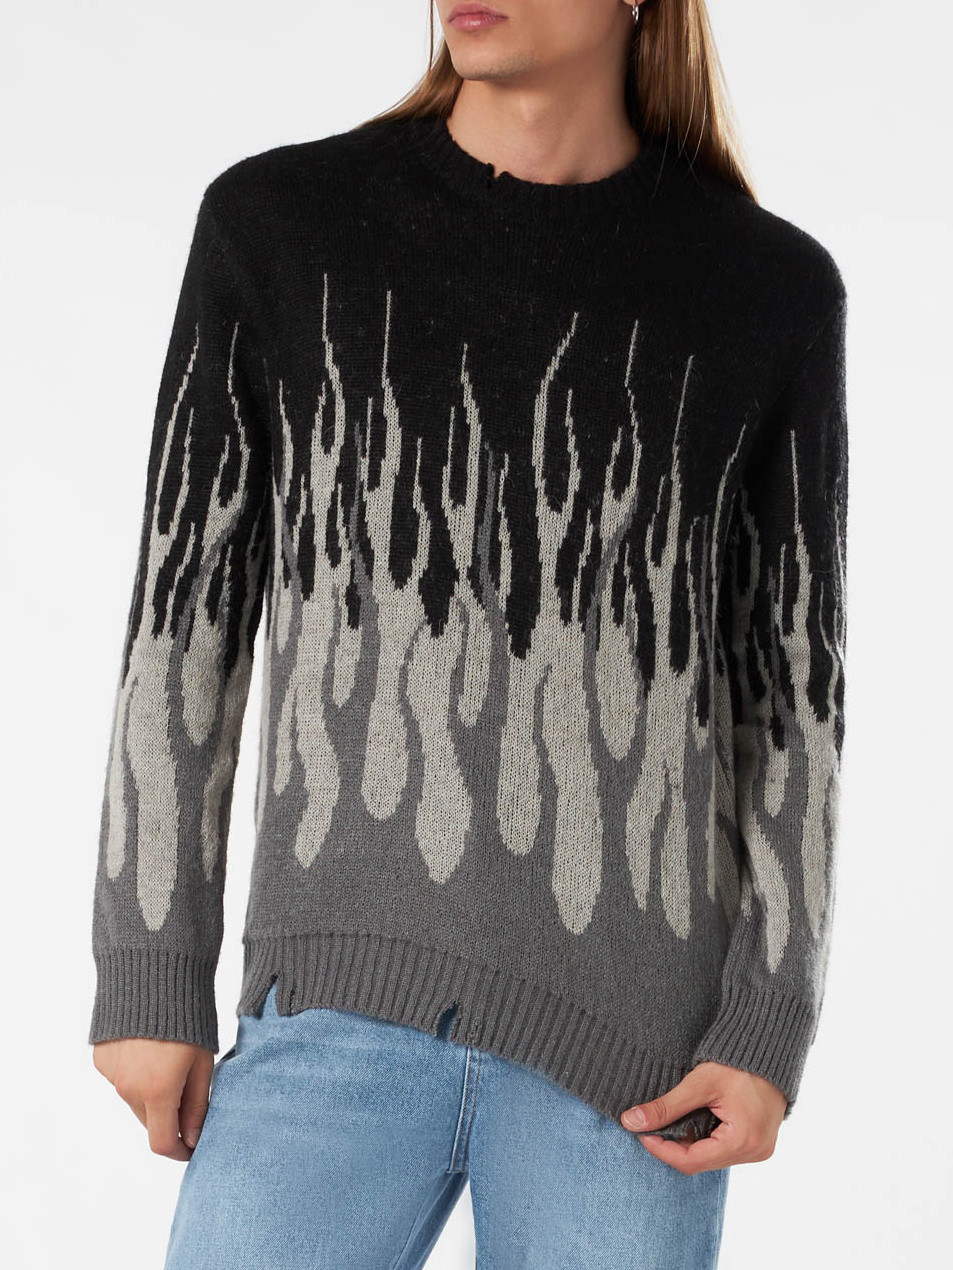 Vision of Super - Double Flame Sweater, Black, large image number 1